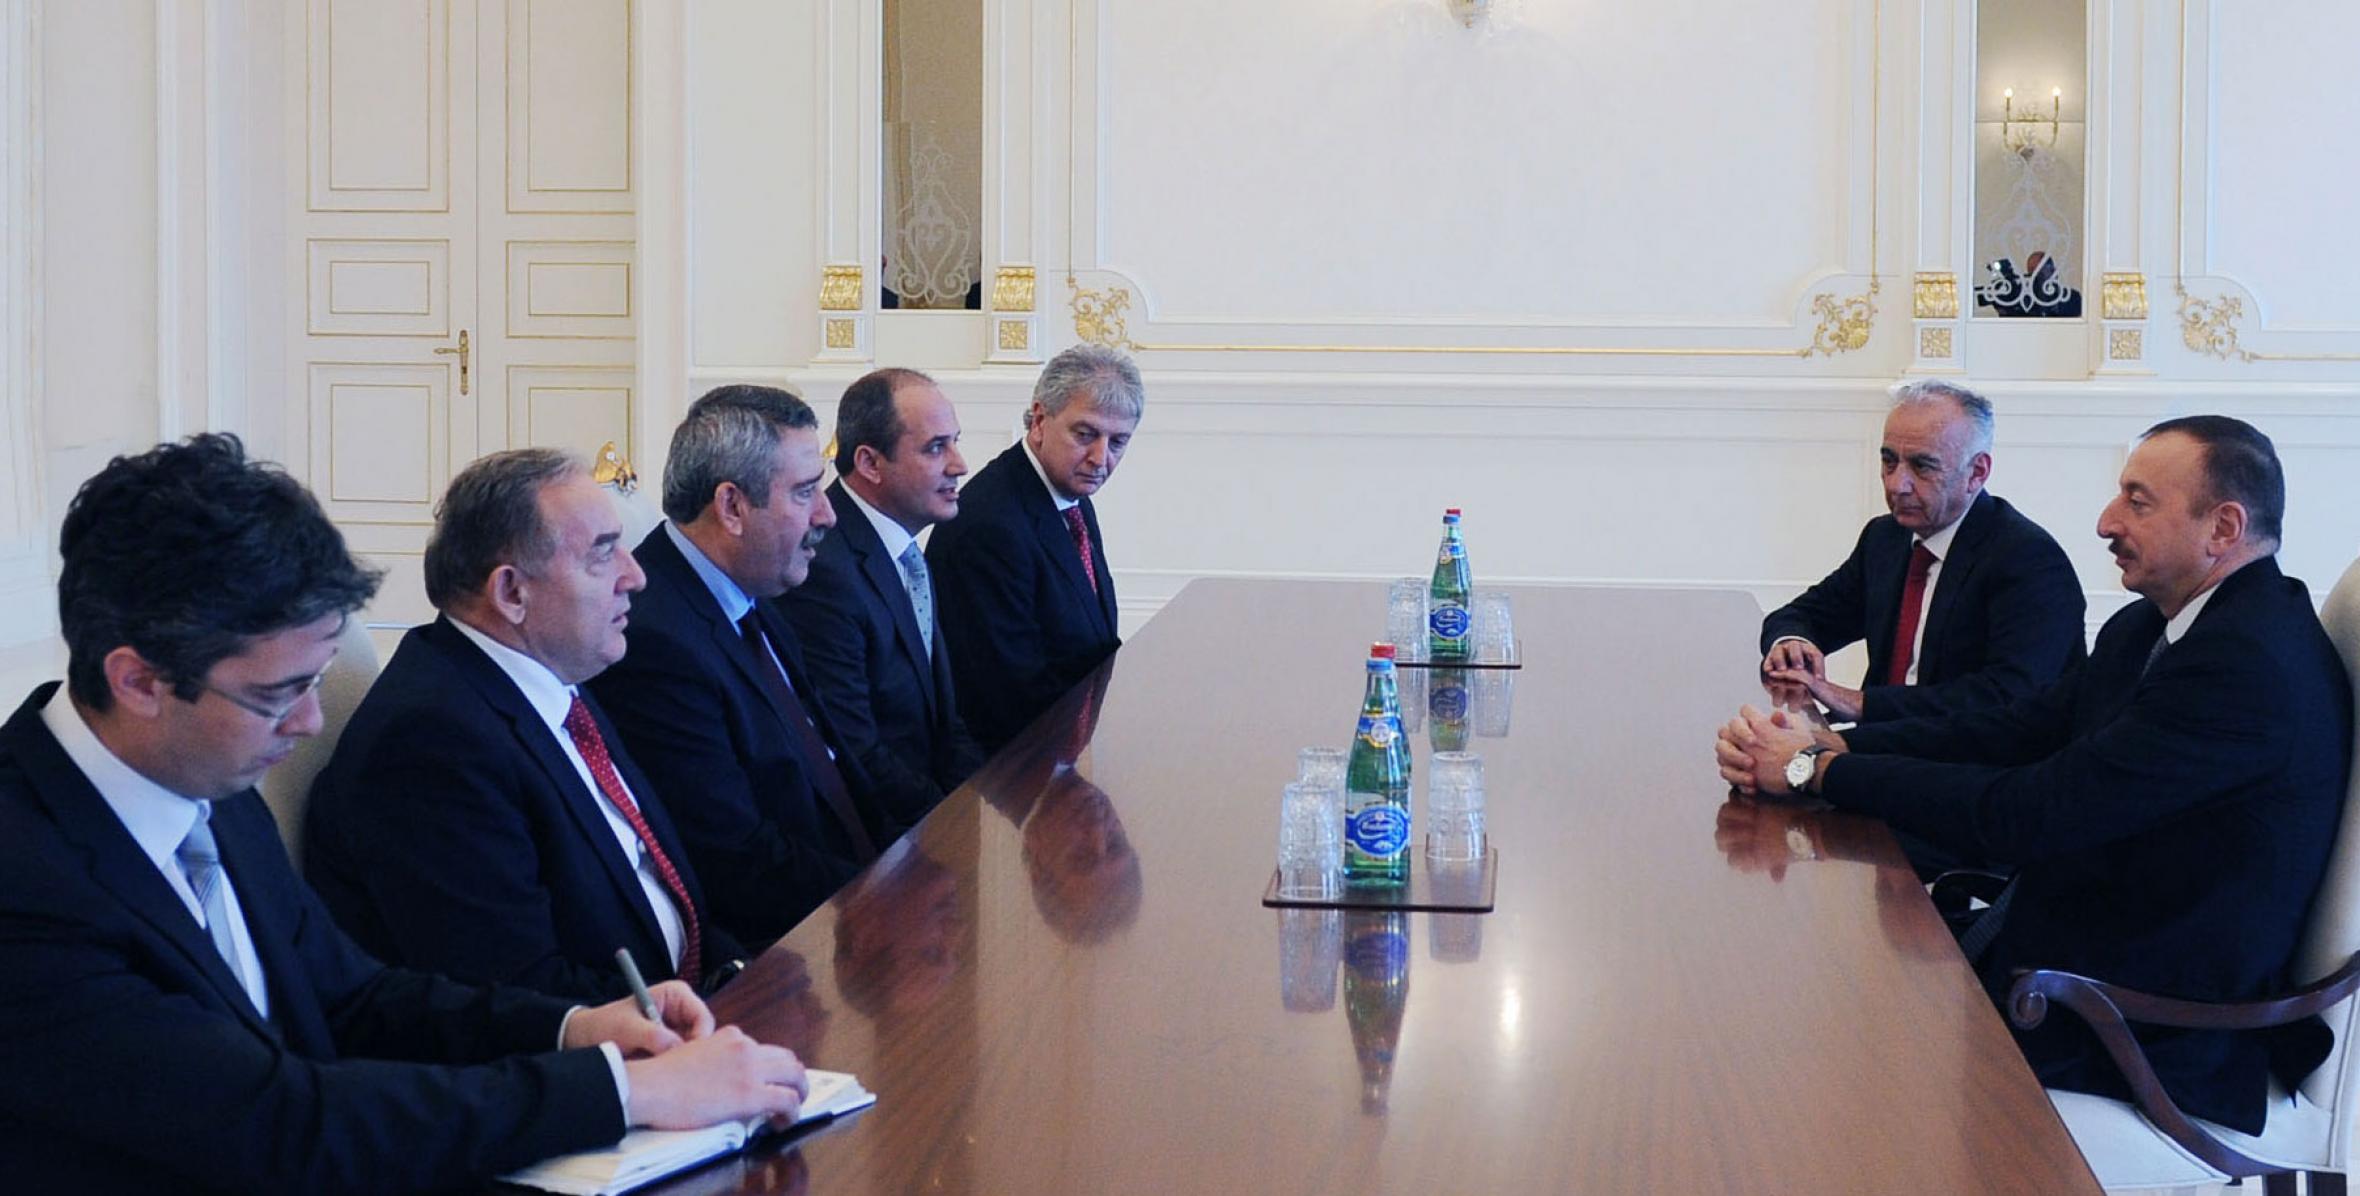 Ilham Aliyev received a delegation led by the governor of the Turkish province of Izmir, Mustafa Cahit Kirac